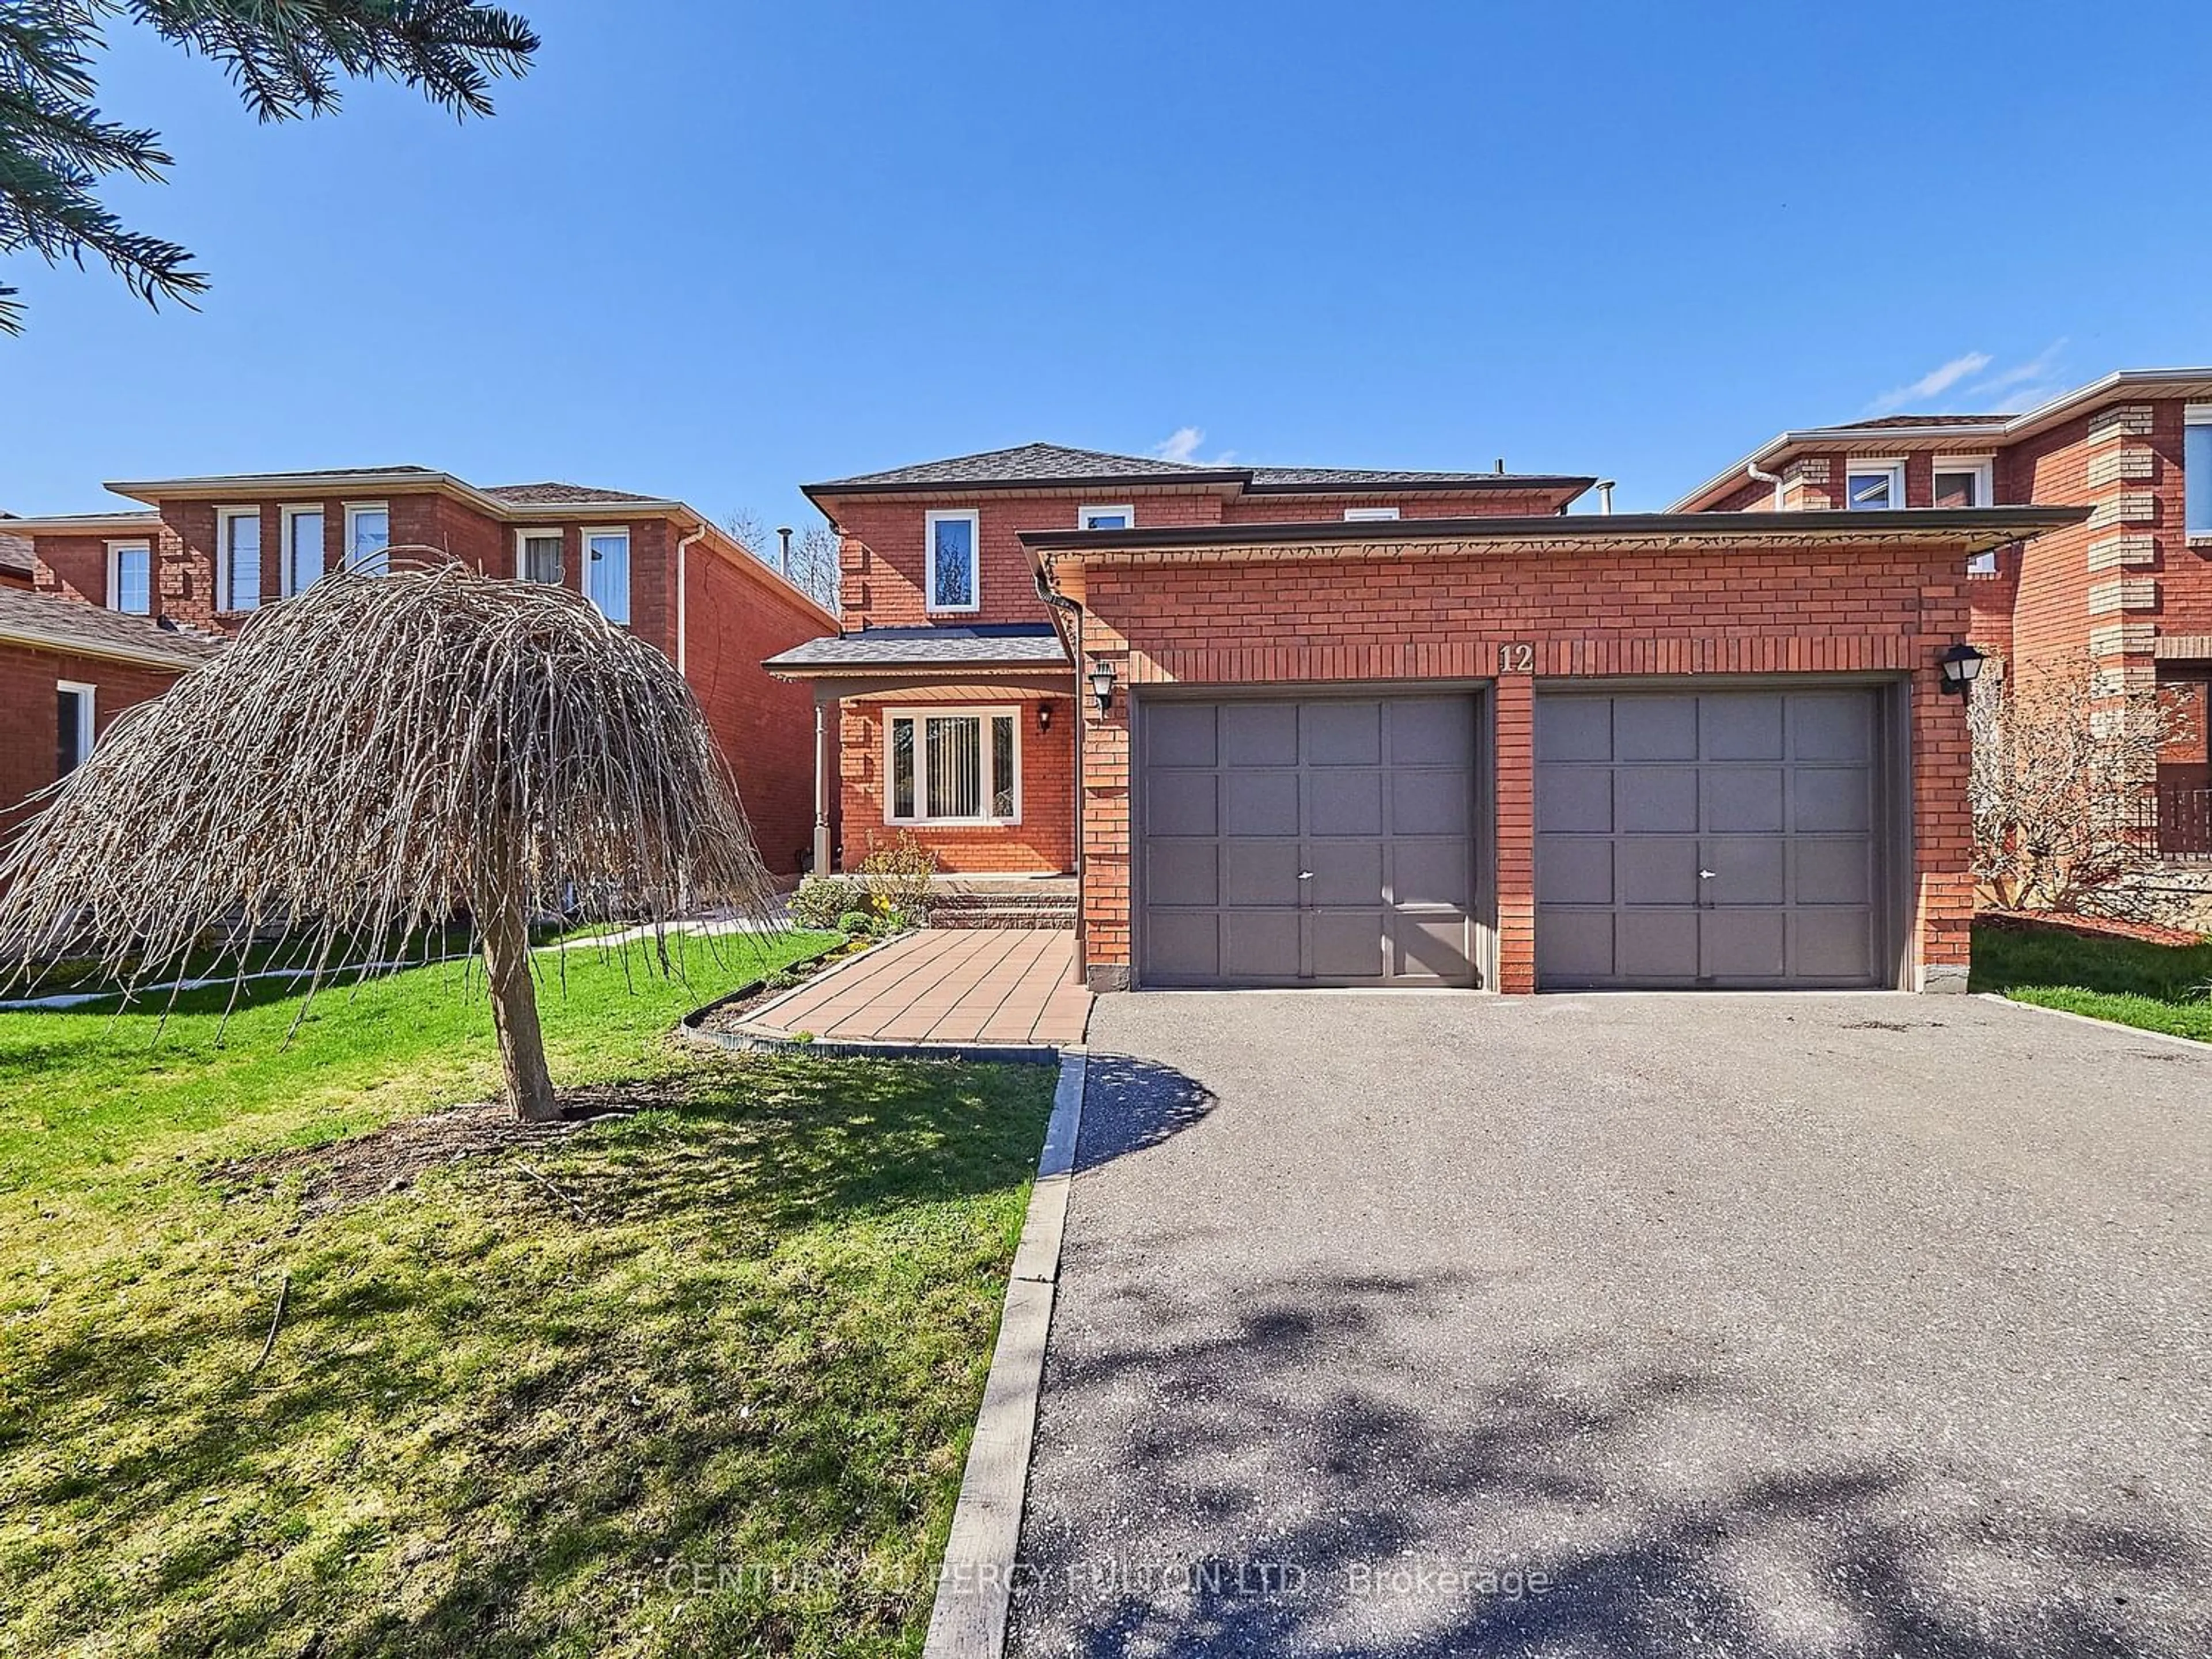 Home with brick exterior material for 12 Keeble Cres, Ajax Ontario L1T 3R8